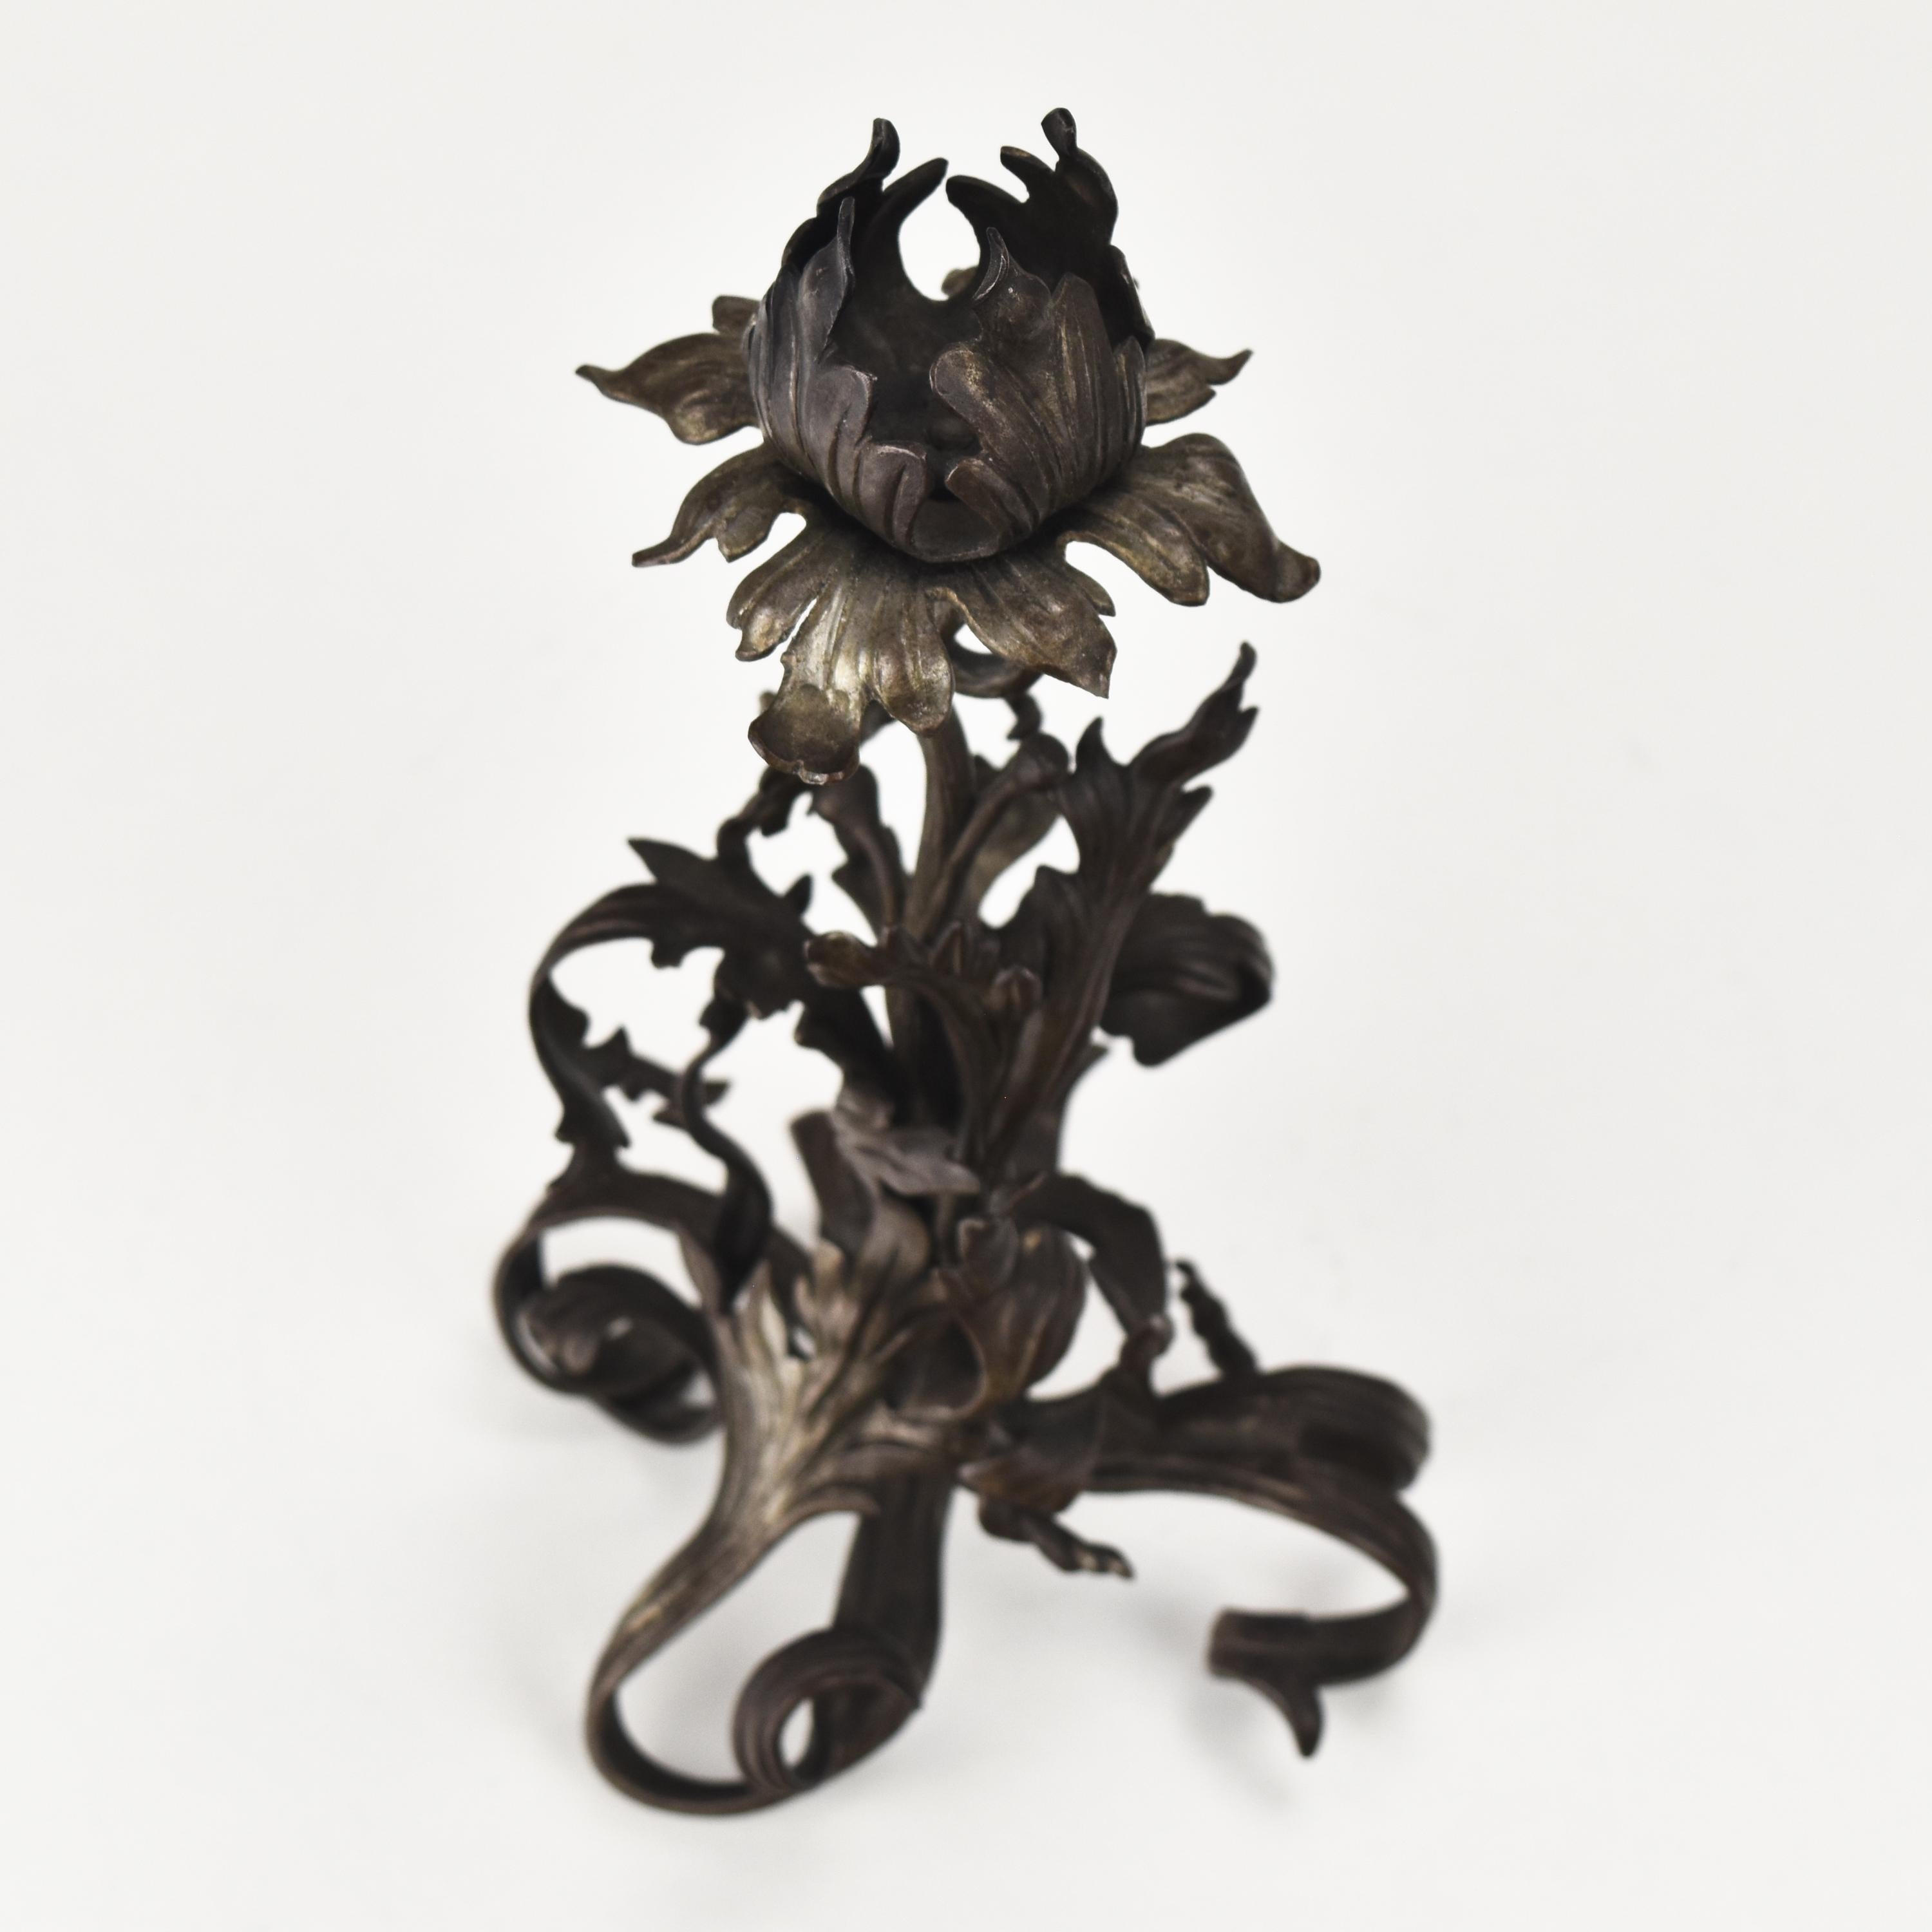 This hand-forged candle holder is an exquisite piece of the Arts & Crafts era. It depicts a thistle, and its design is attributed to the Ecole de Nancy made during the Art Nouveau period.
The candlestick resembling the works of Louis Majorelle,